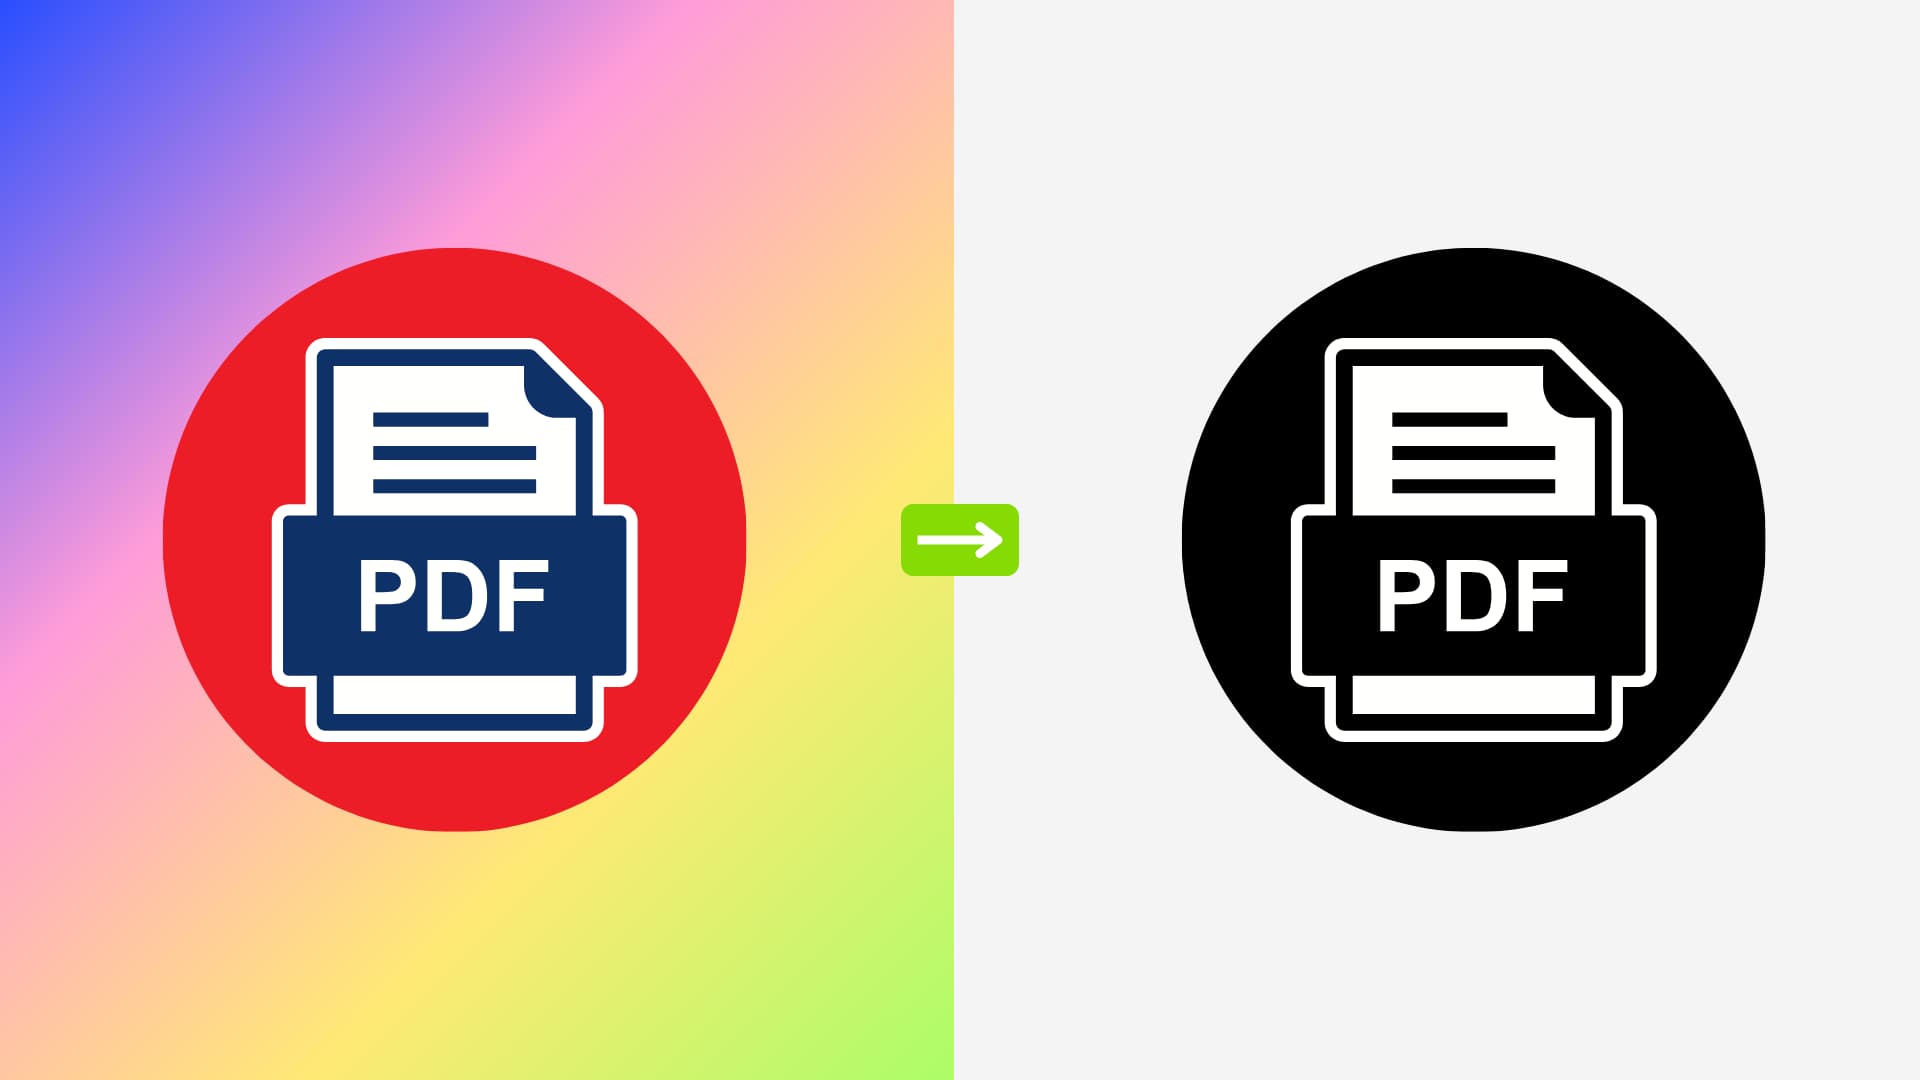 Convert color PDF to black and white